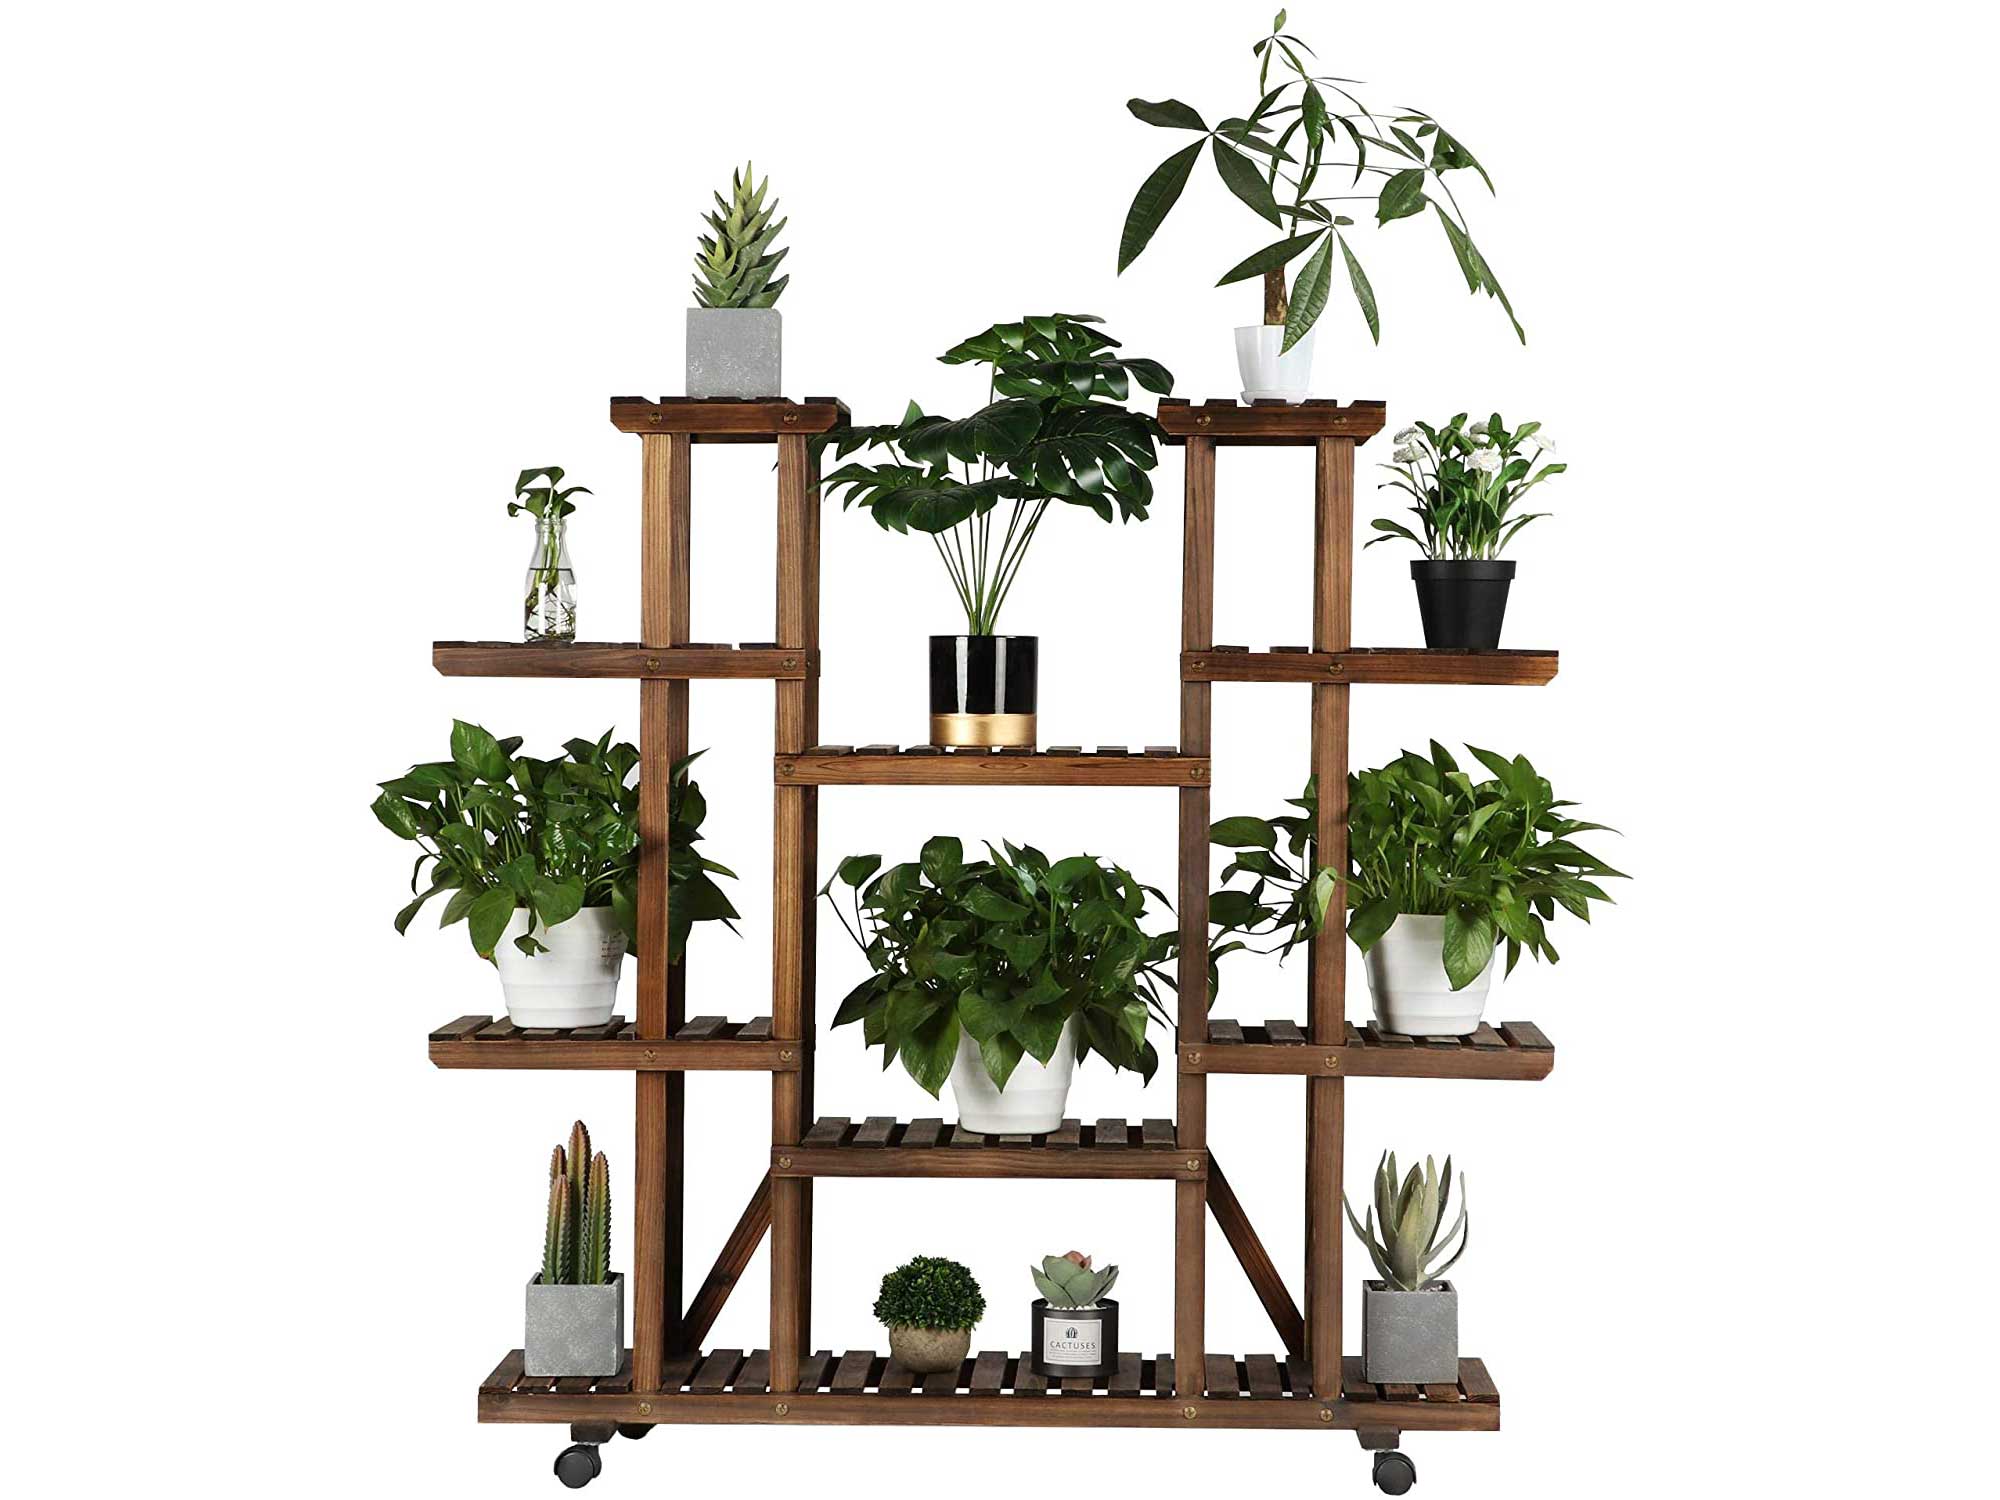 YAHEETECH Rolling Plant Stand Shelf Indoor - 6 Tier Wood Plant Pots Shelves Tiered Flower Rack Holder Stand with Detachable Wheels for Multiple Plants Outdoor Garden Balcony Patio Living Room